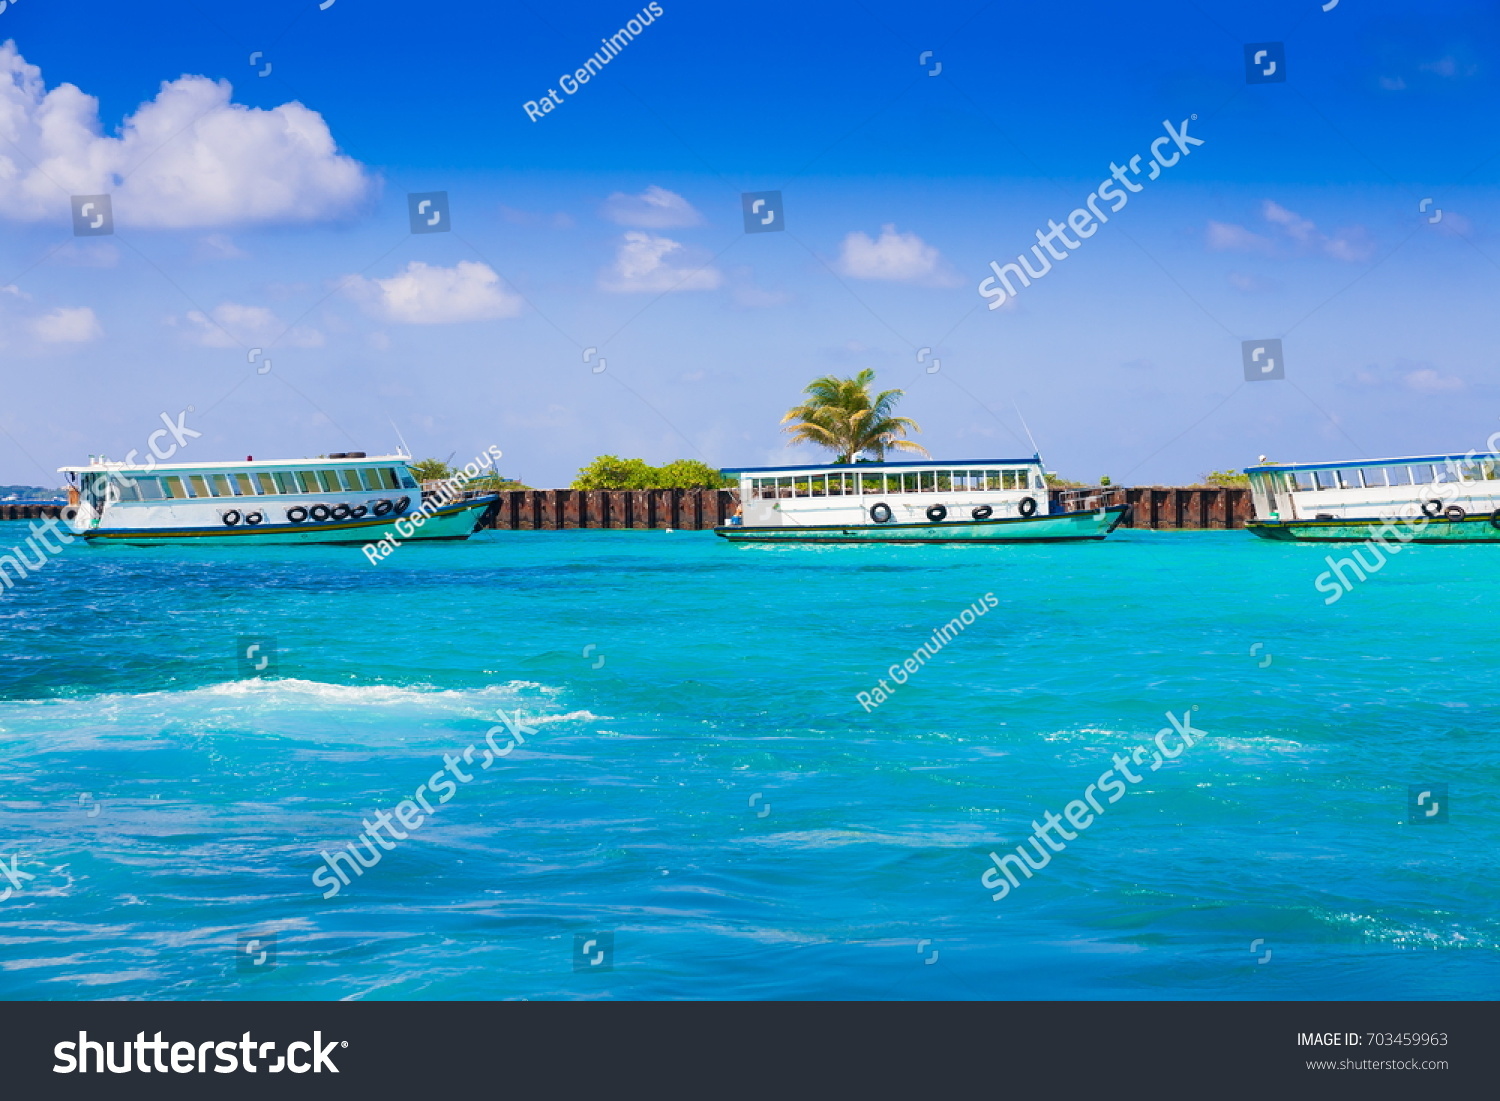 Tropical blue sea in island Male, country Maldives. Amazing nature landscape and boat. Wonderful luxury paradise. Beautiful exotic atoll.  Travel background.  Inspiration resort clear water.  #703459963